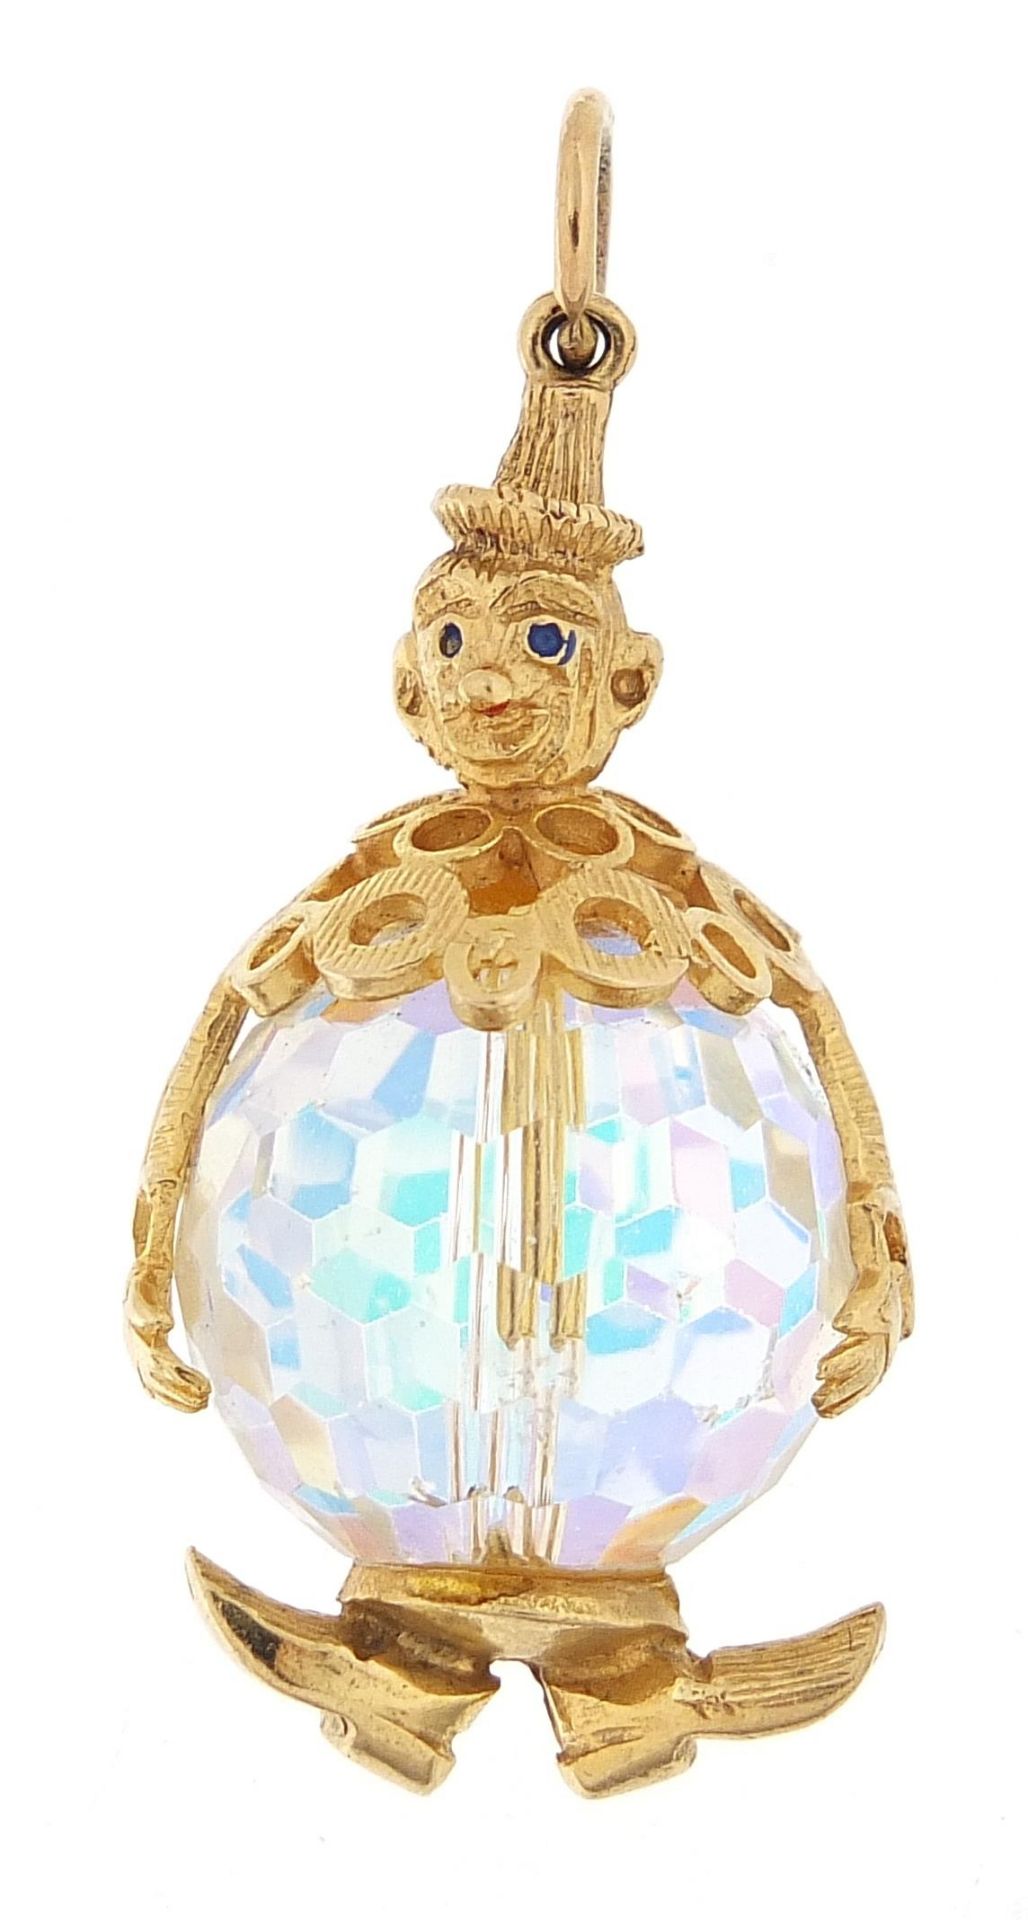 Large 9ct gold and crystal clown charm, 3.2cm high, 11.0g